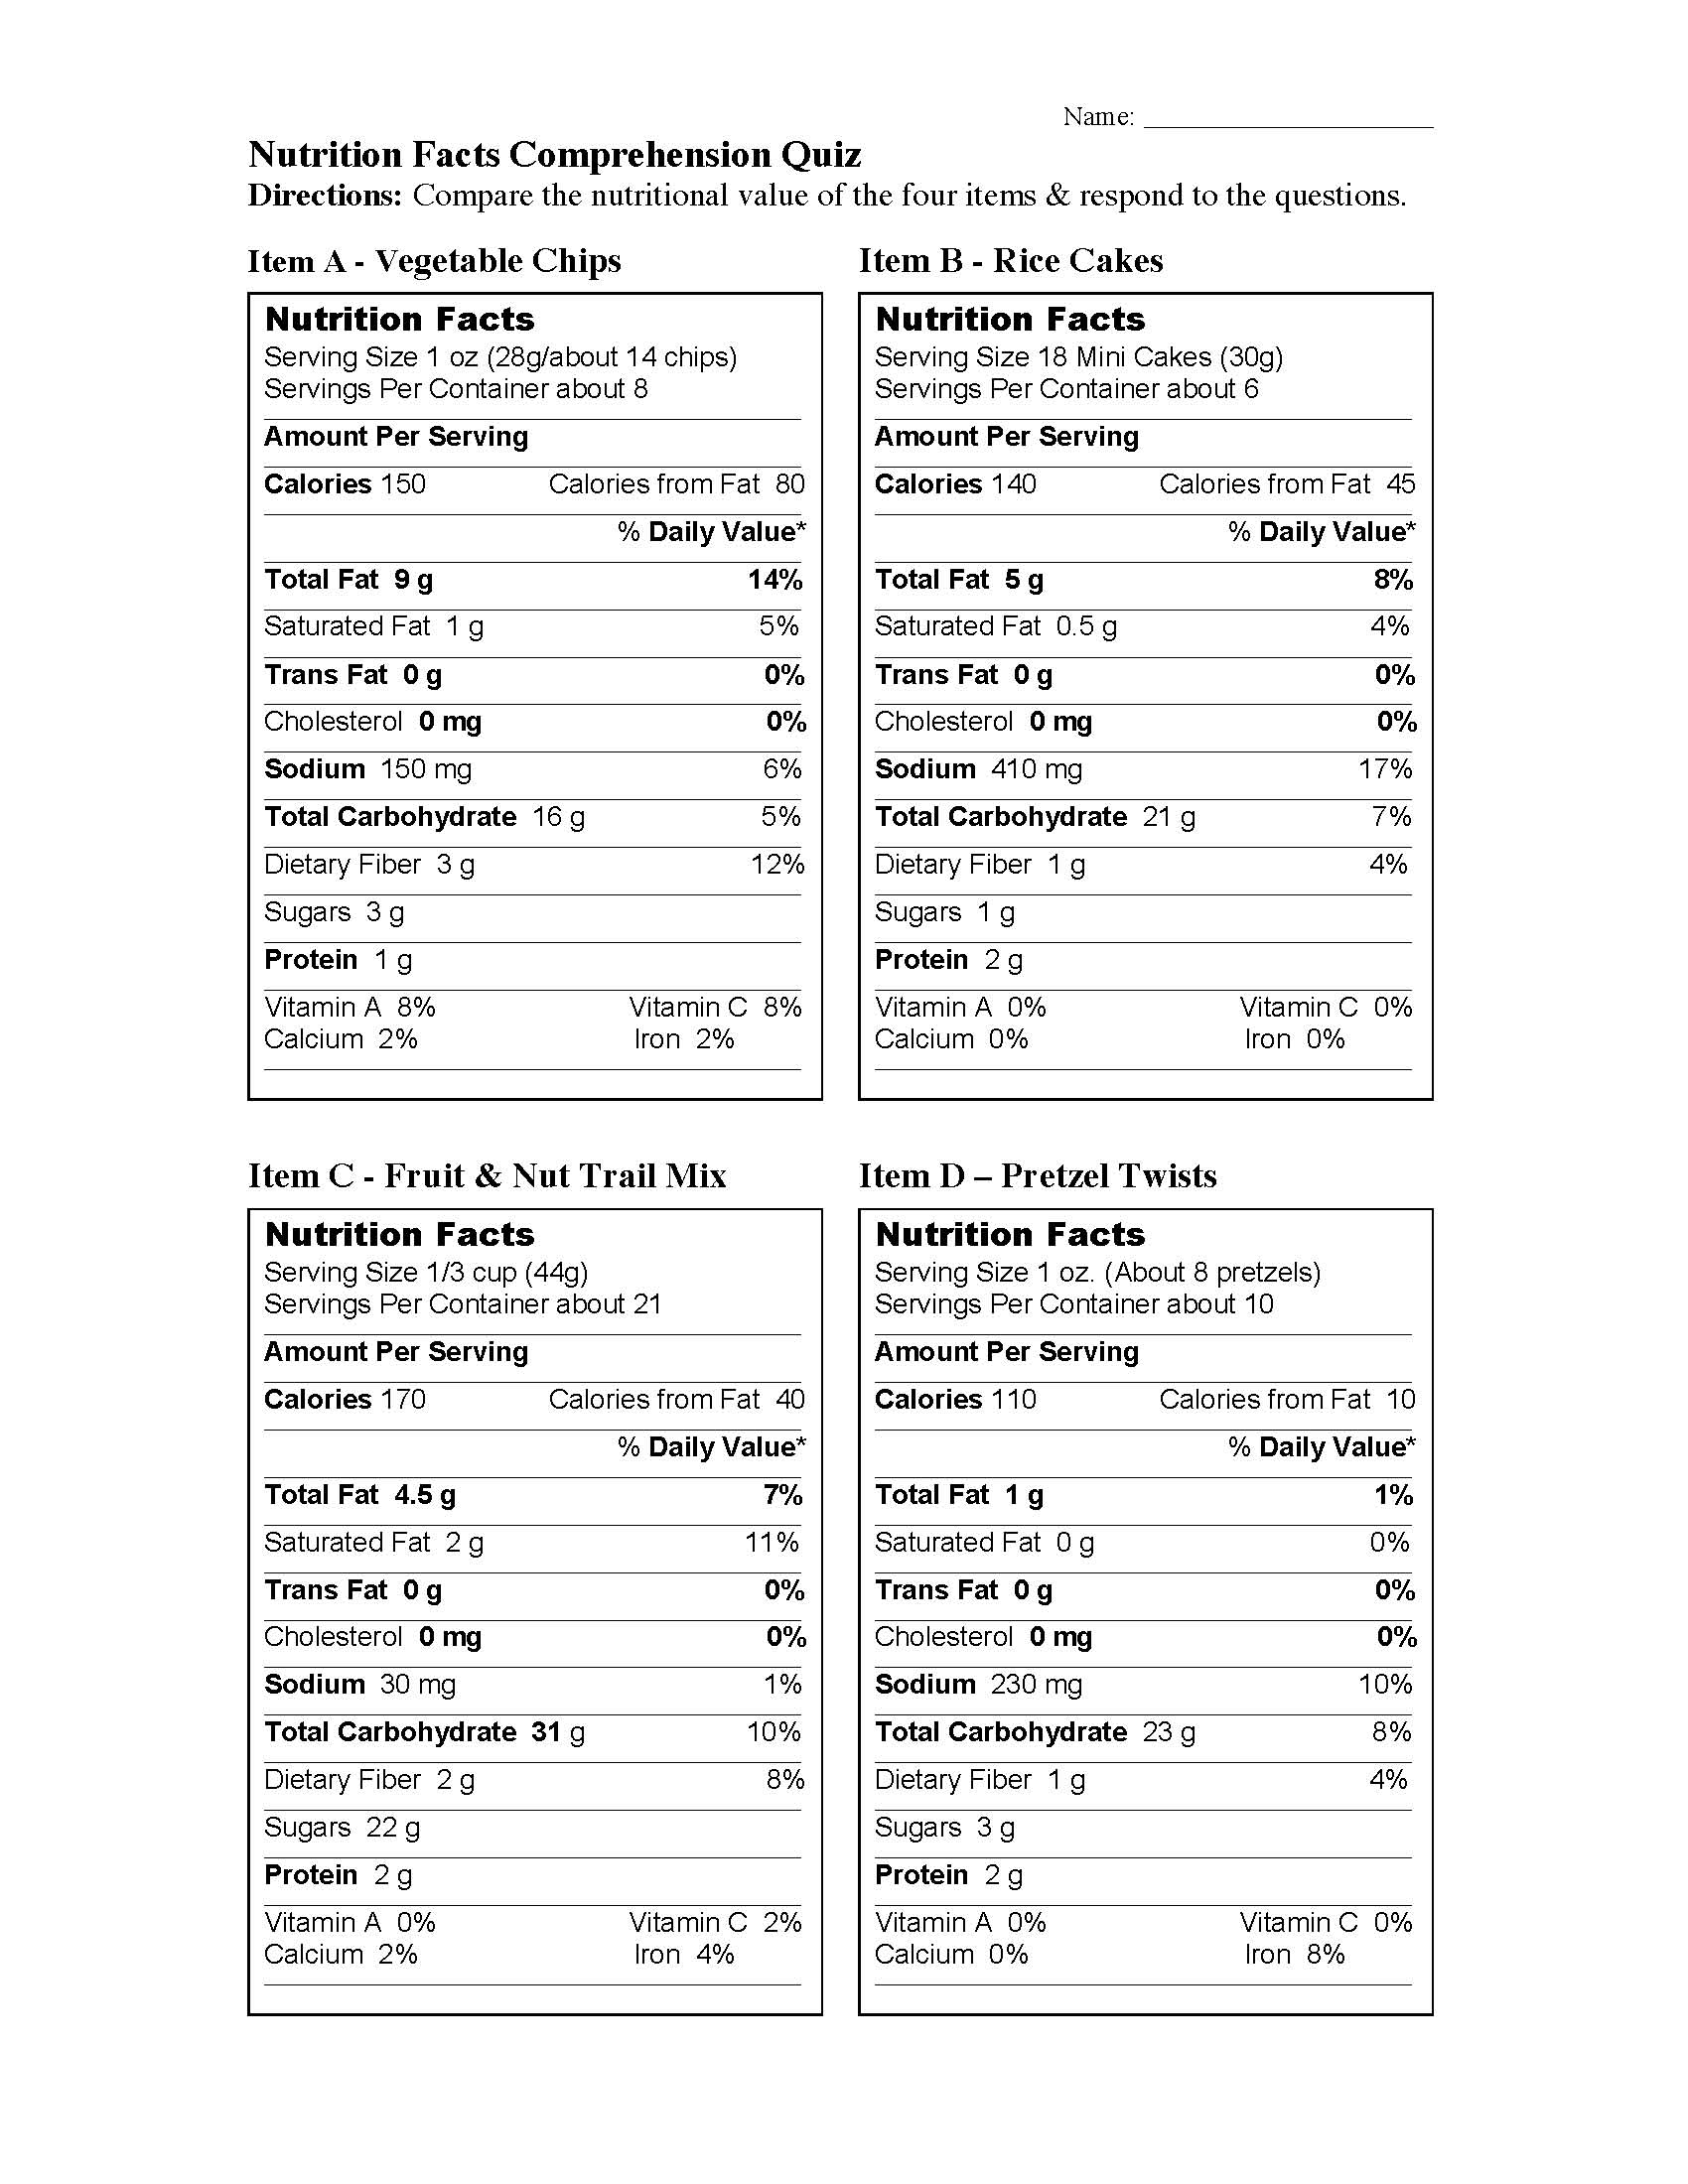 This is a preview image of Nutritional Facts Comparison. Click on it to enlarge it or view the source file.